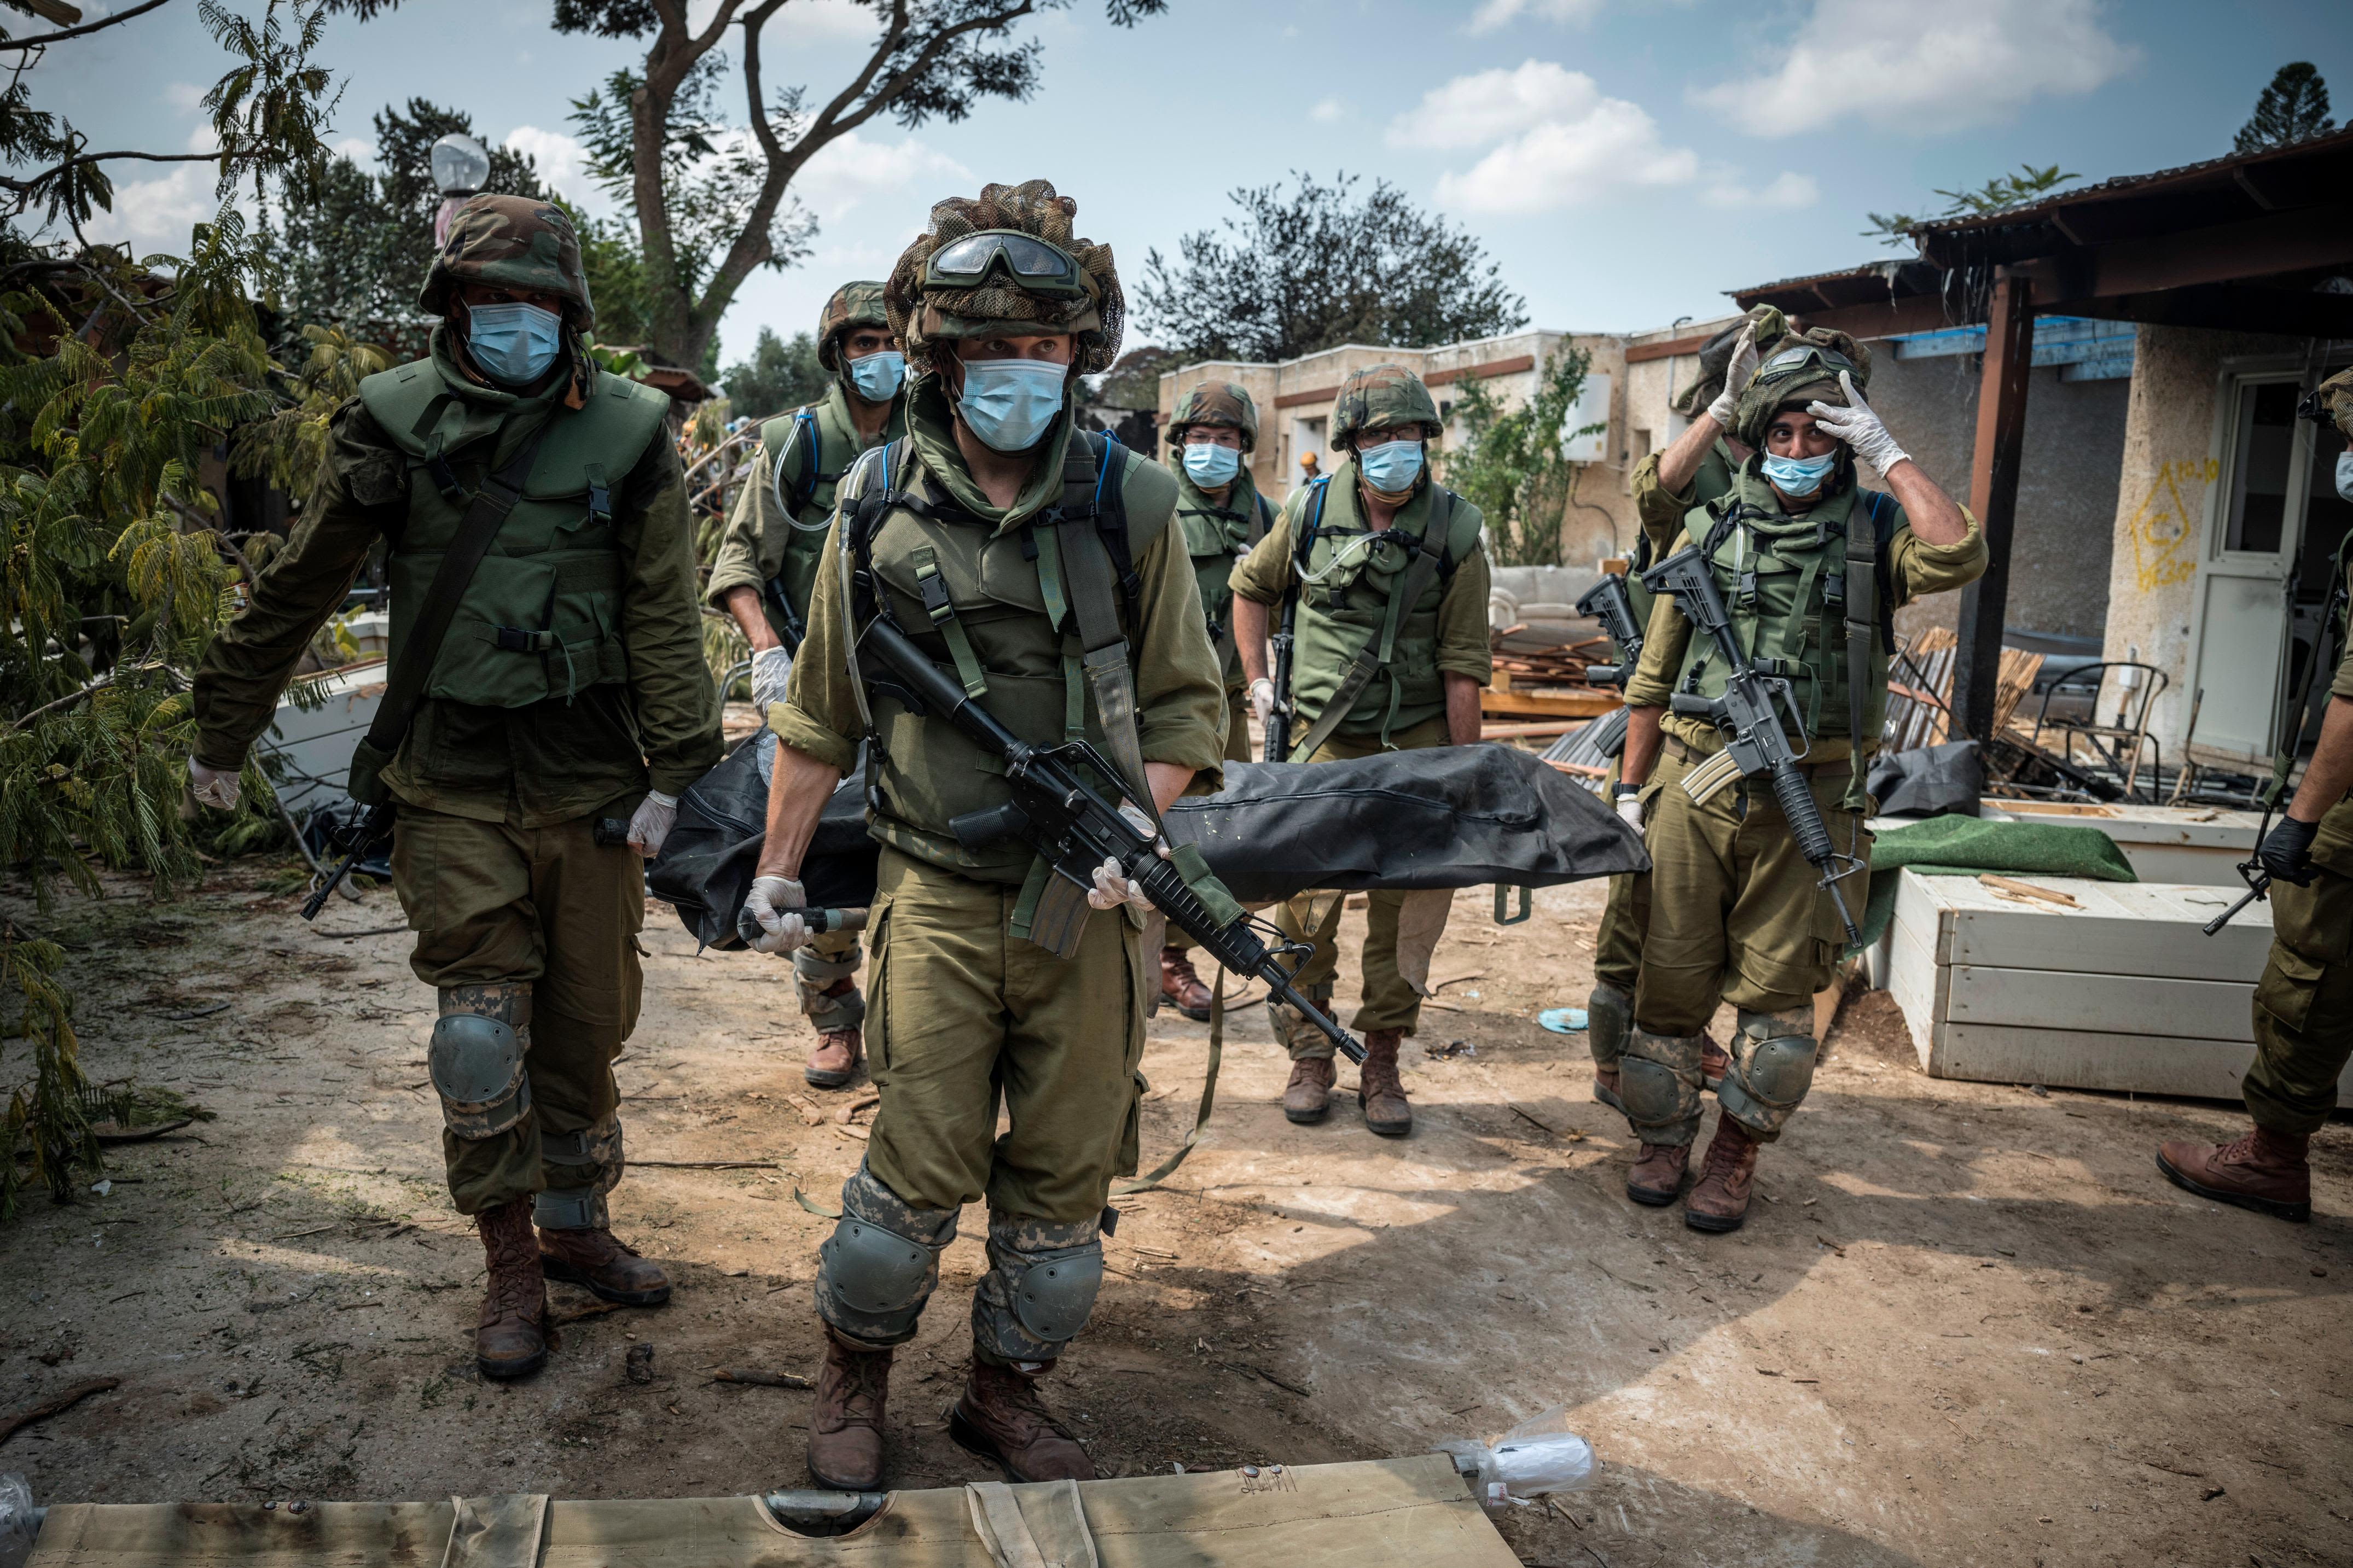 Israeli soldiers carry a body on October 10 in Kfar Aza, a village in Israel just across the border from Gaza. Hamas militants carried out a 'massacre' in Kfar Aza during their attacks over the weekend, <a href='https://www.cnn.com/middleeast/live-news/israel-hamas-war-gaza-10-10-23/h_7867b7563e54a0b29dddeada7e4c2722' target='_blank'>the Israel Defense Forces told CNN</a>.